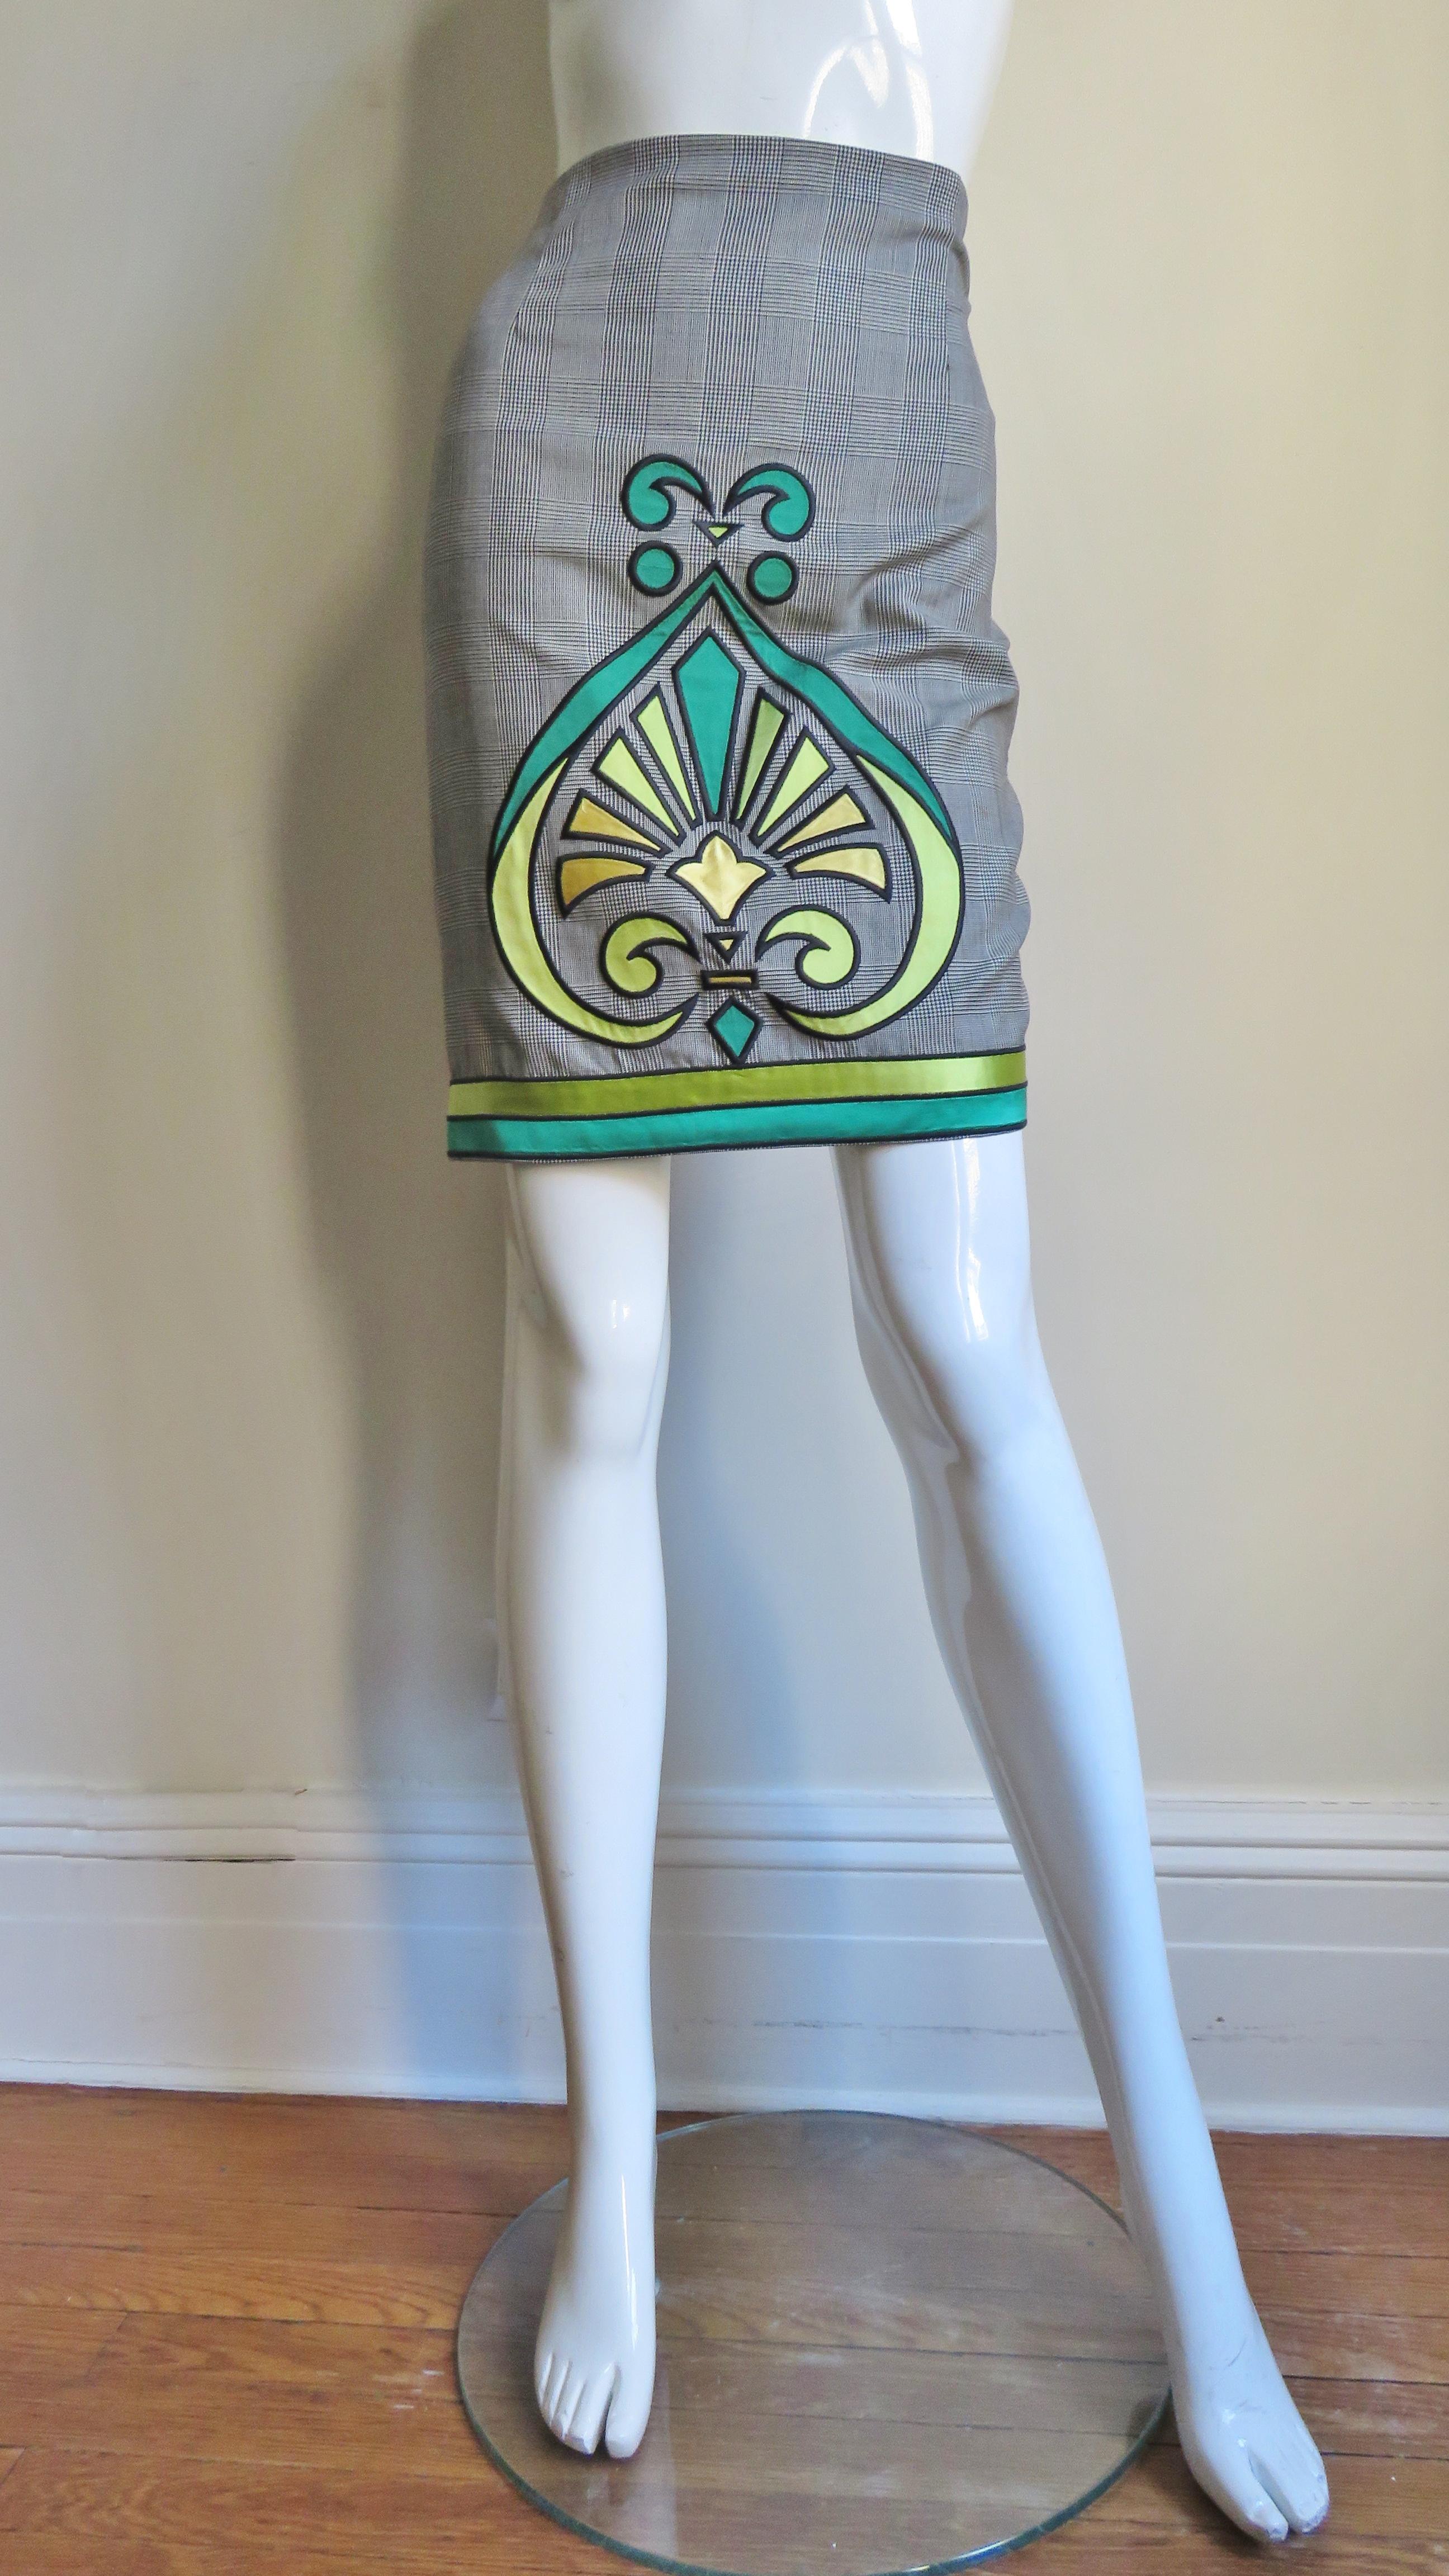 Gianni Versace Reversible Skirt with Elaborate Applique 1990s For Sale 2